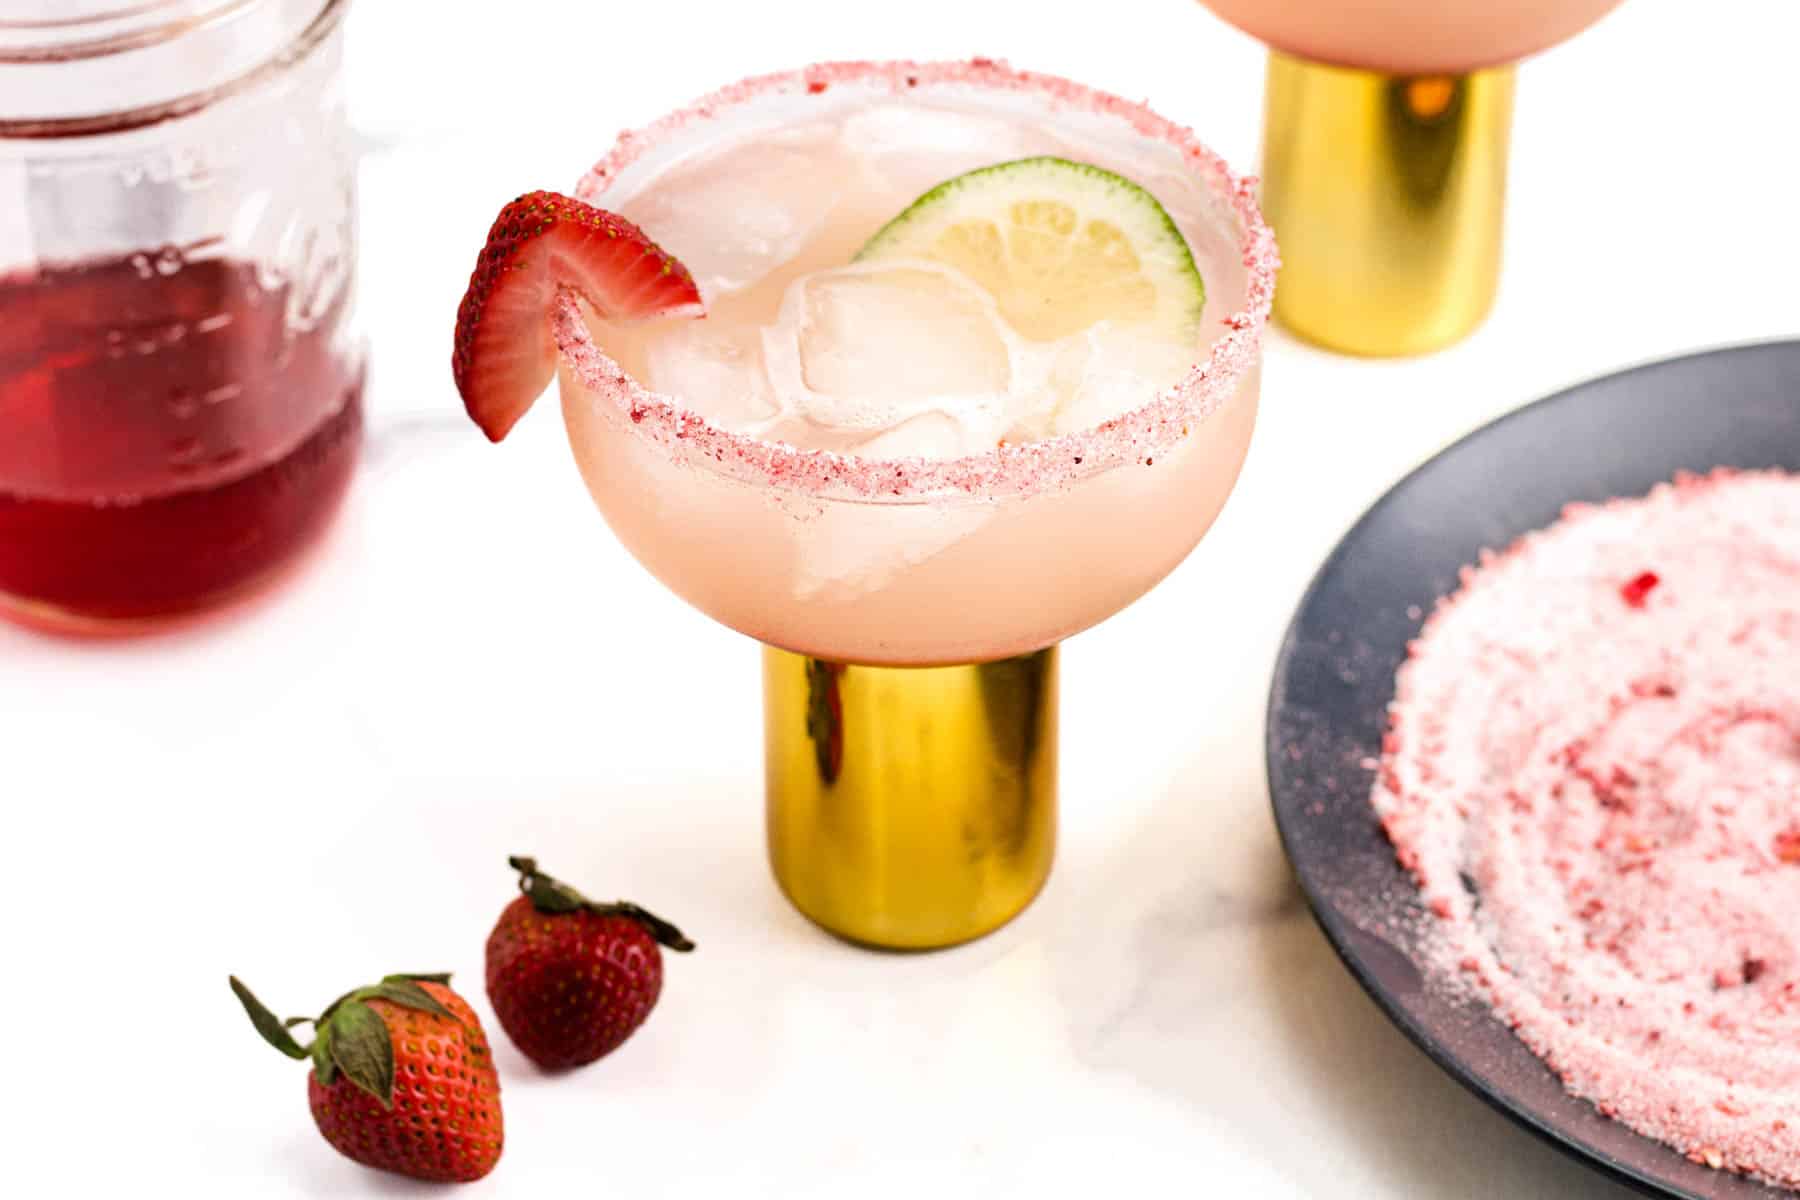 The makings of a Strawberry Margarita sit on a white marble surface around the finished cocktail.